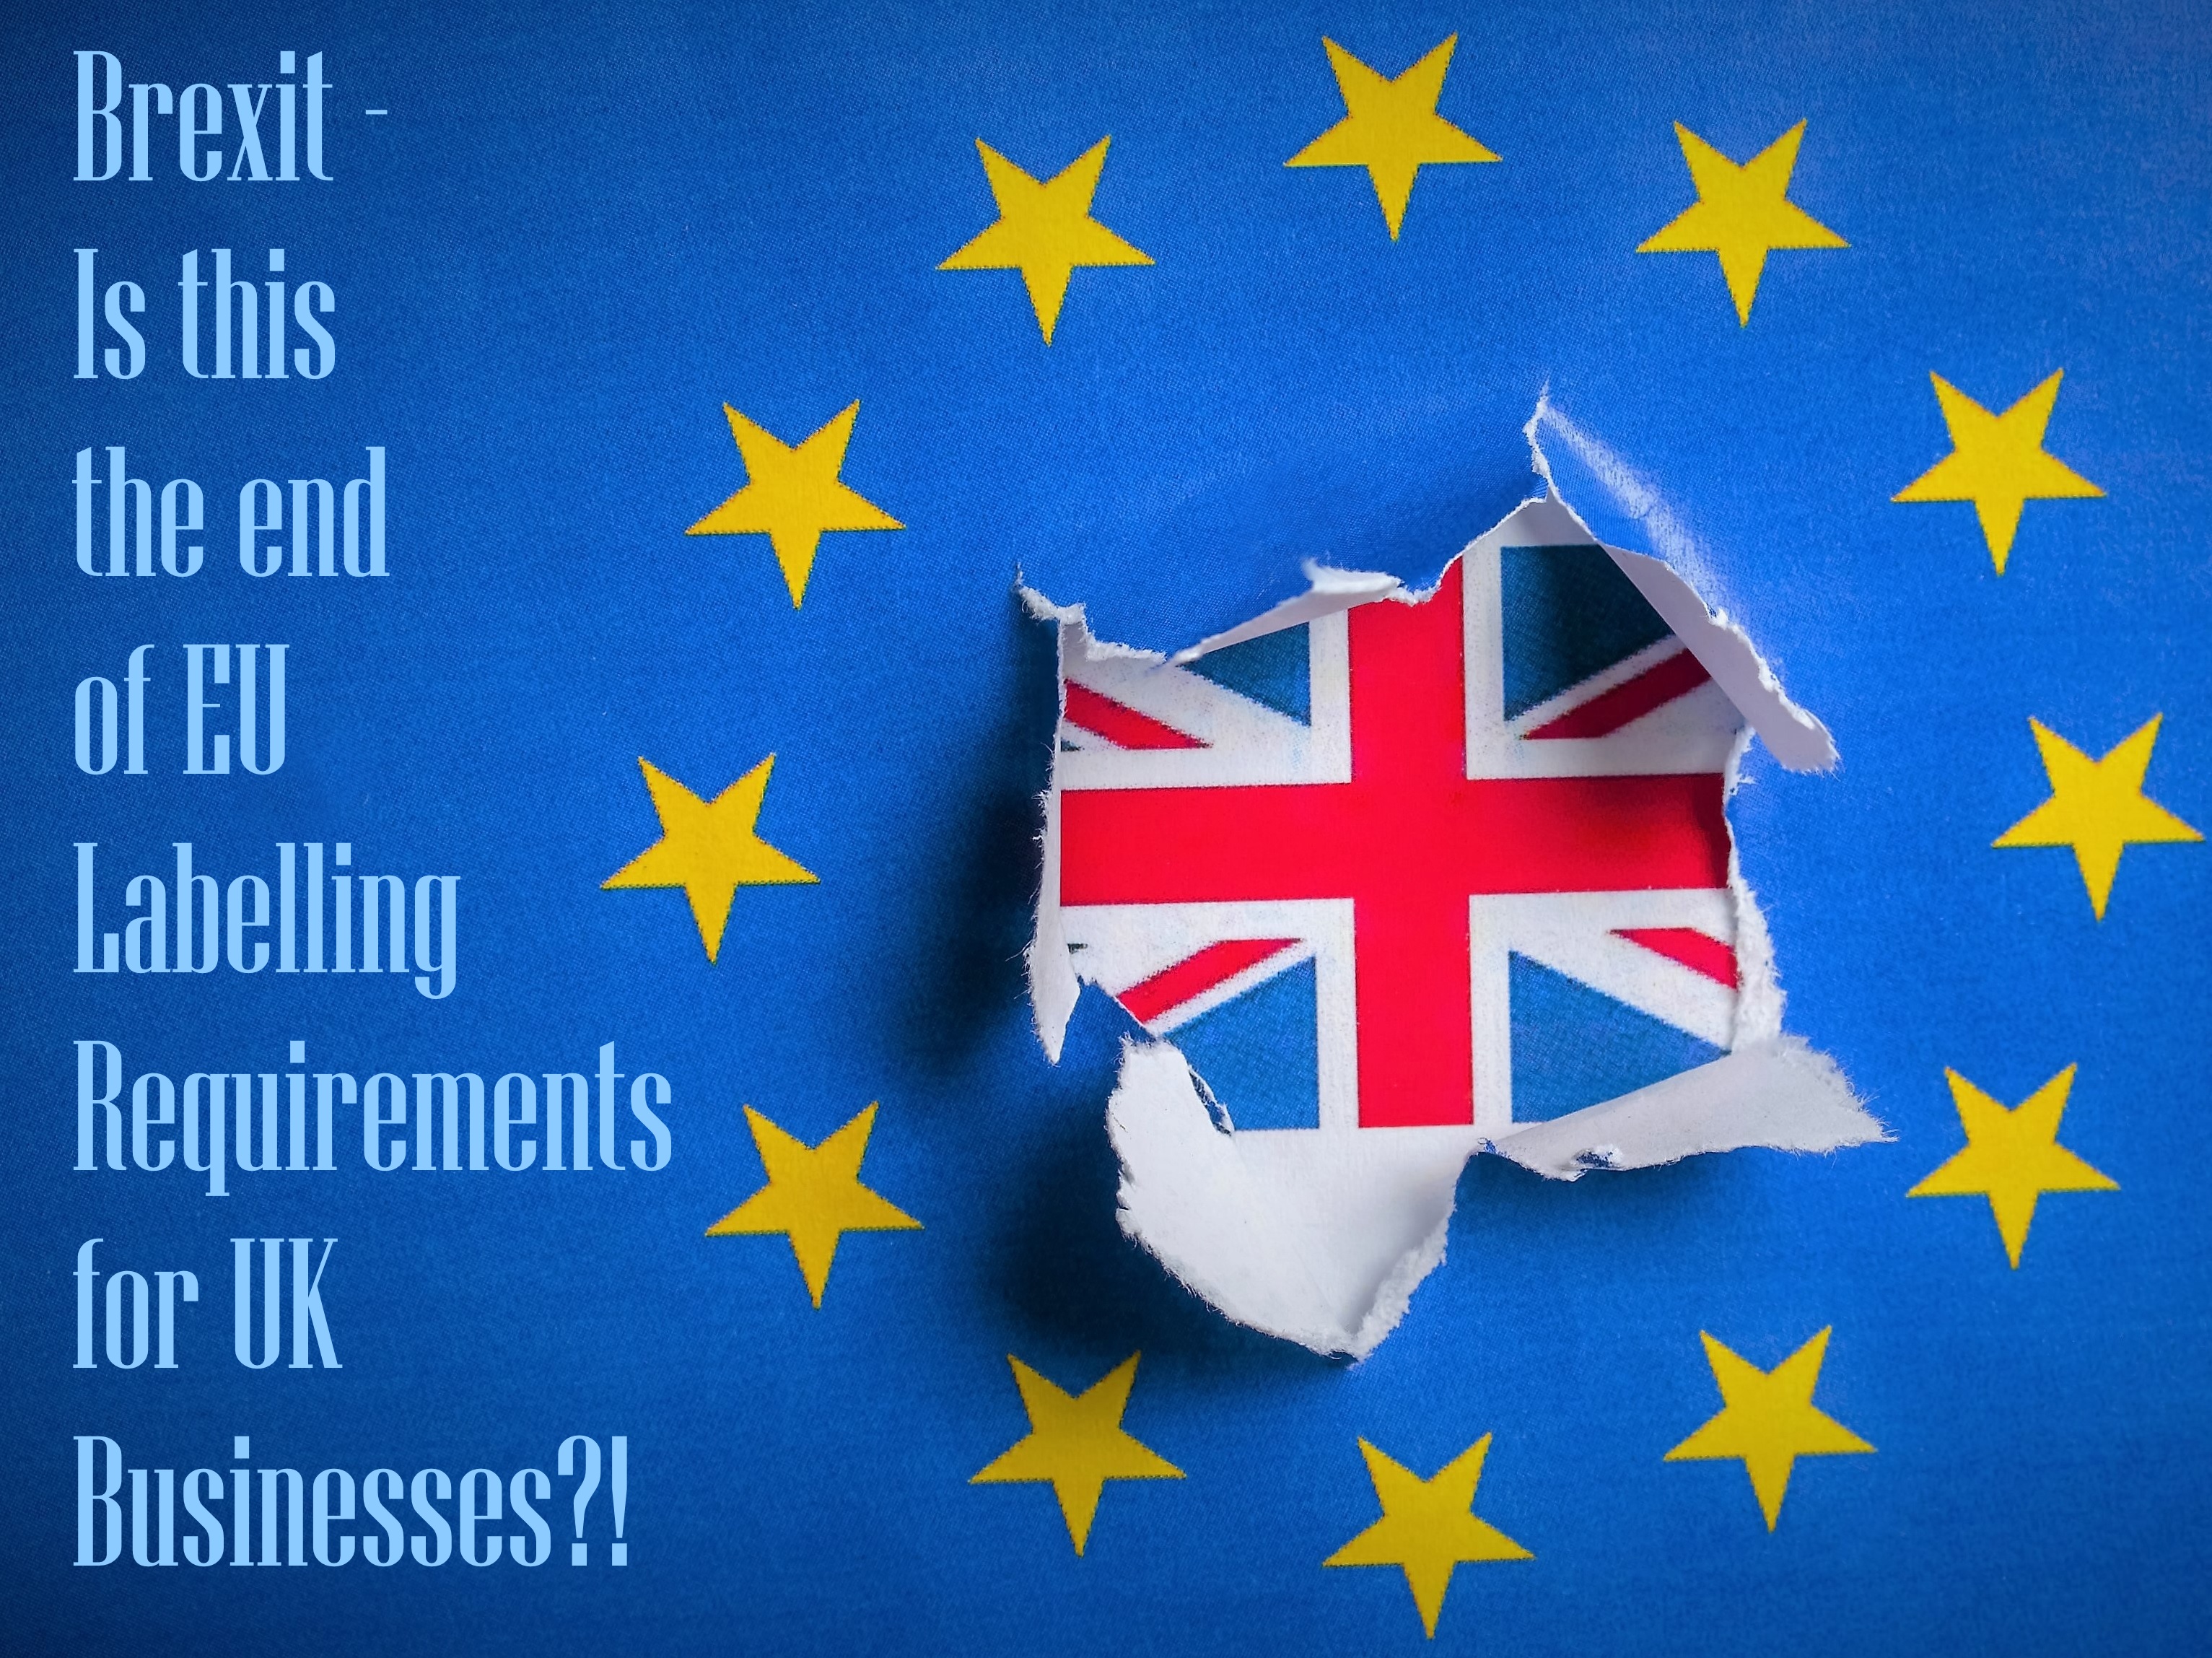 Brexit – Is this the end of EU Labelling Requirements for UK Businesses?!